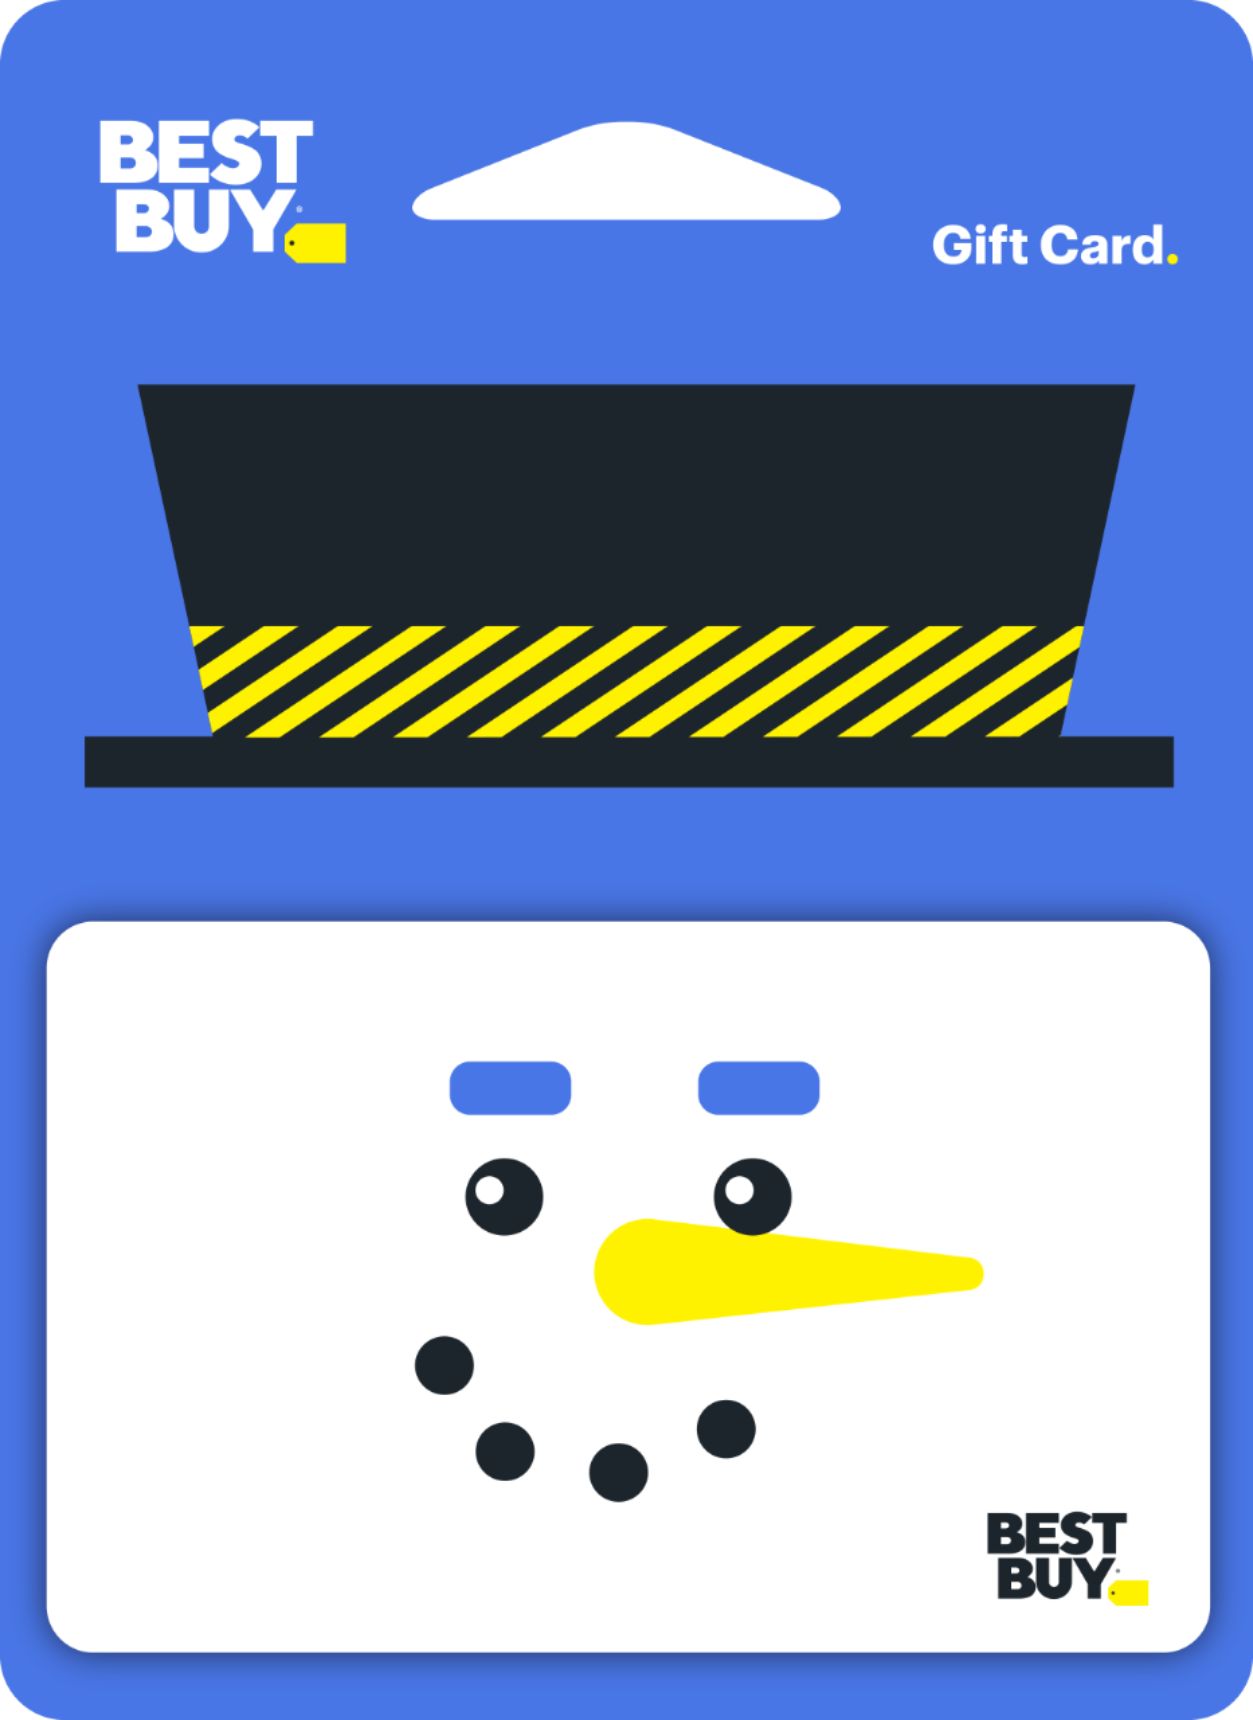 Best Buy 100 Snowman Gift Card 6411840 Best Buy - robux cards at best buy 100